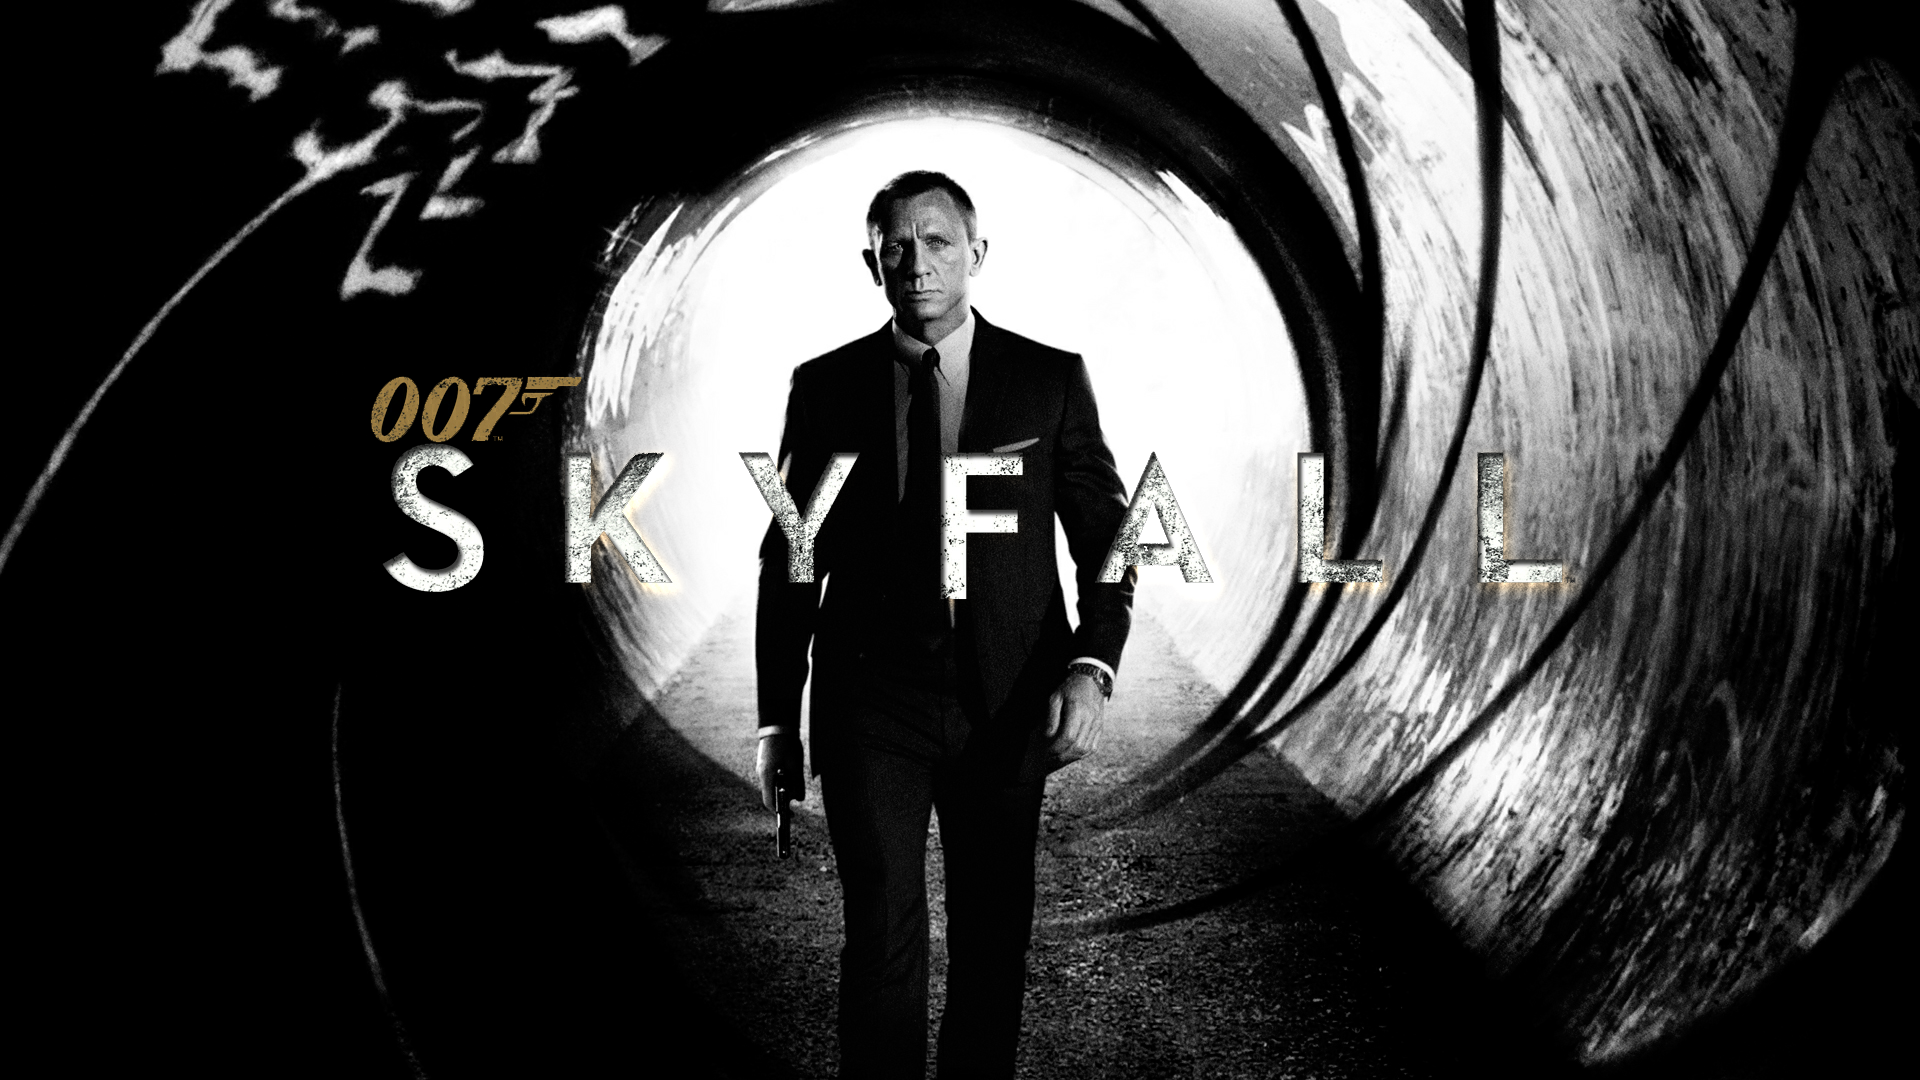 download the new for windows Skyfall